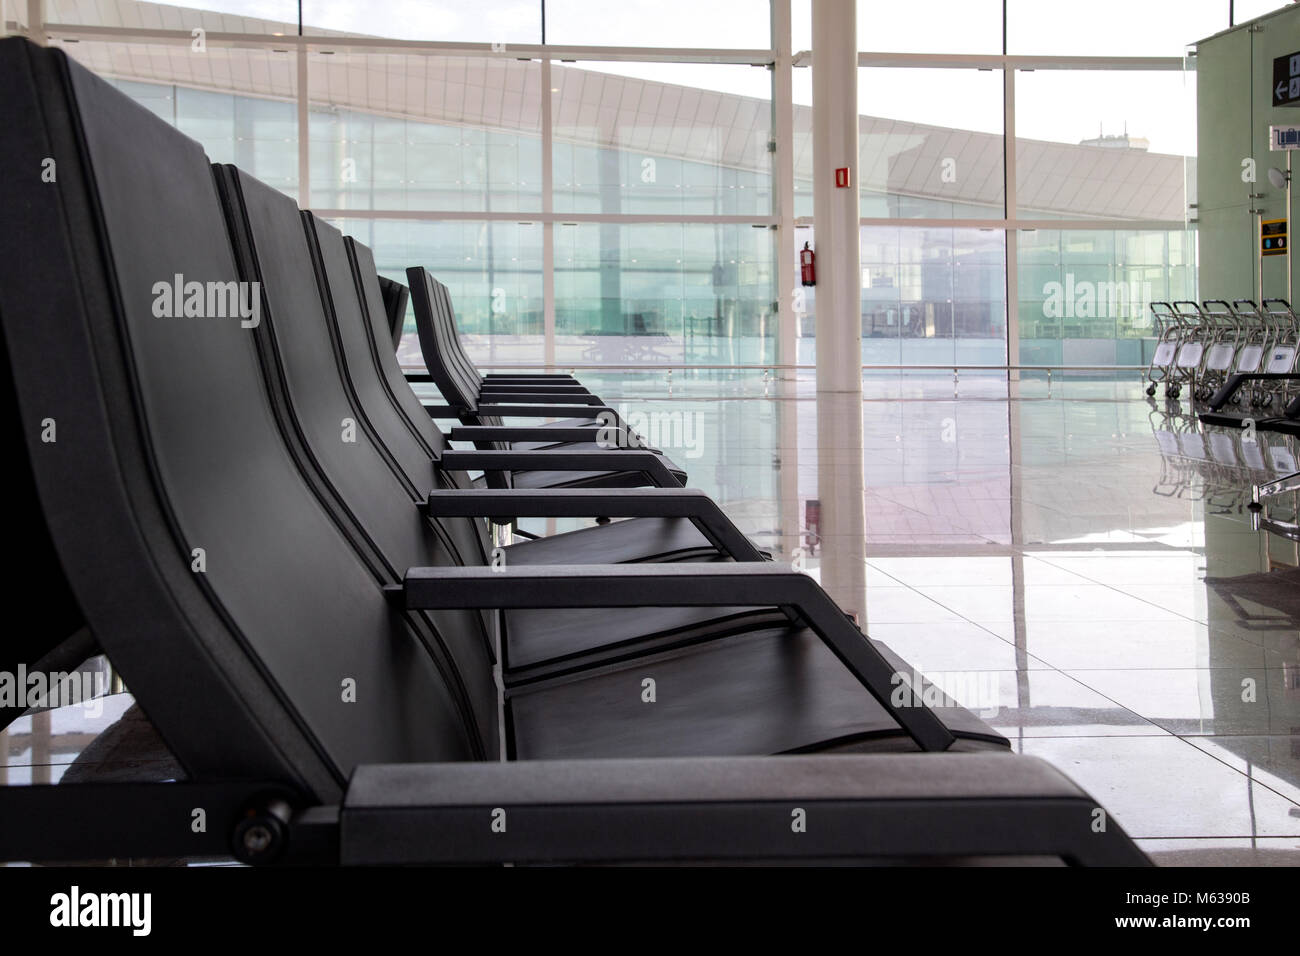 Seats at the gate in Barcelona airport Stock Photo